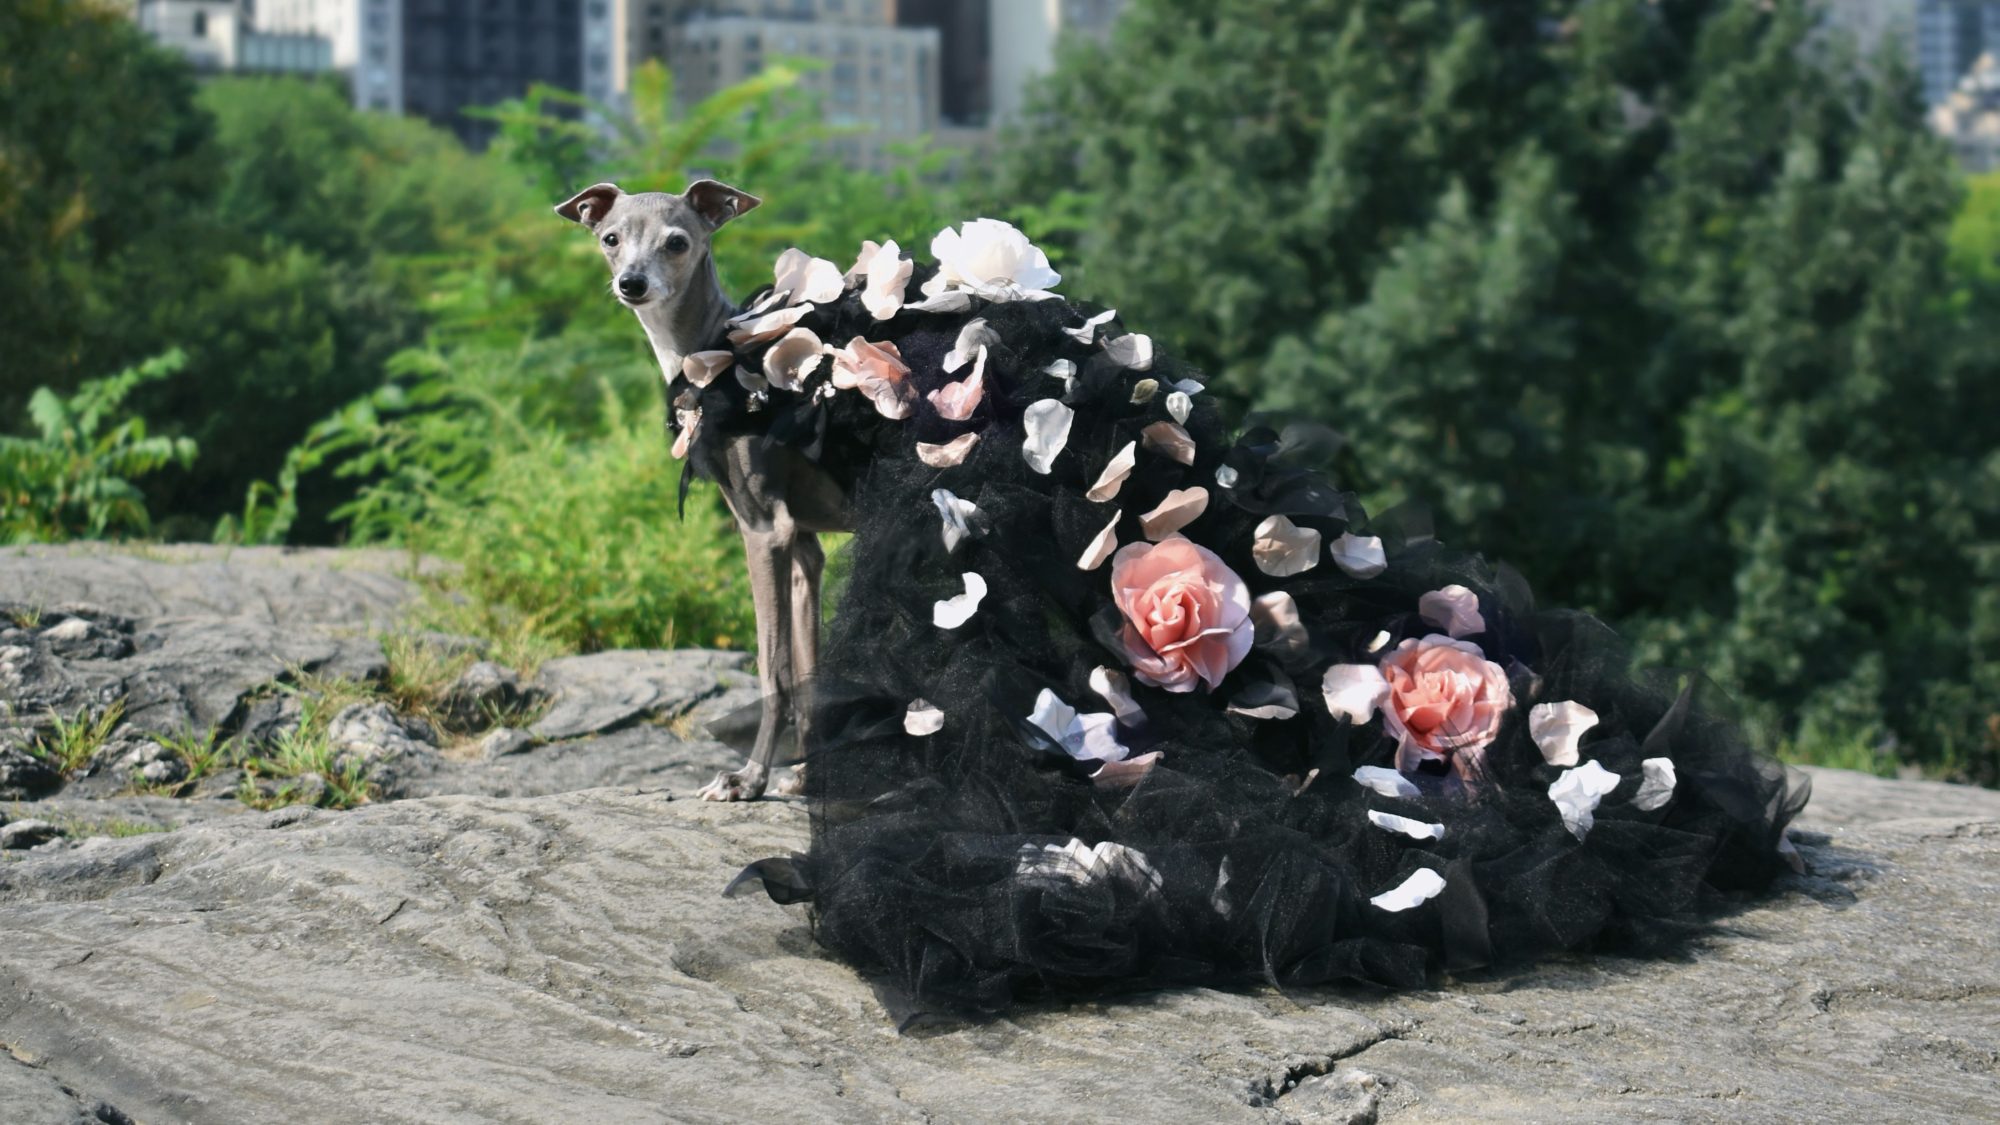 An Italian greyhound wearing a long tulle dress adorned with flowers sitting on a rock in front of some foliage.